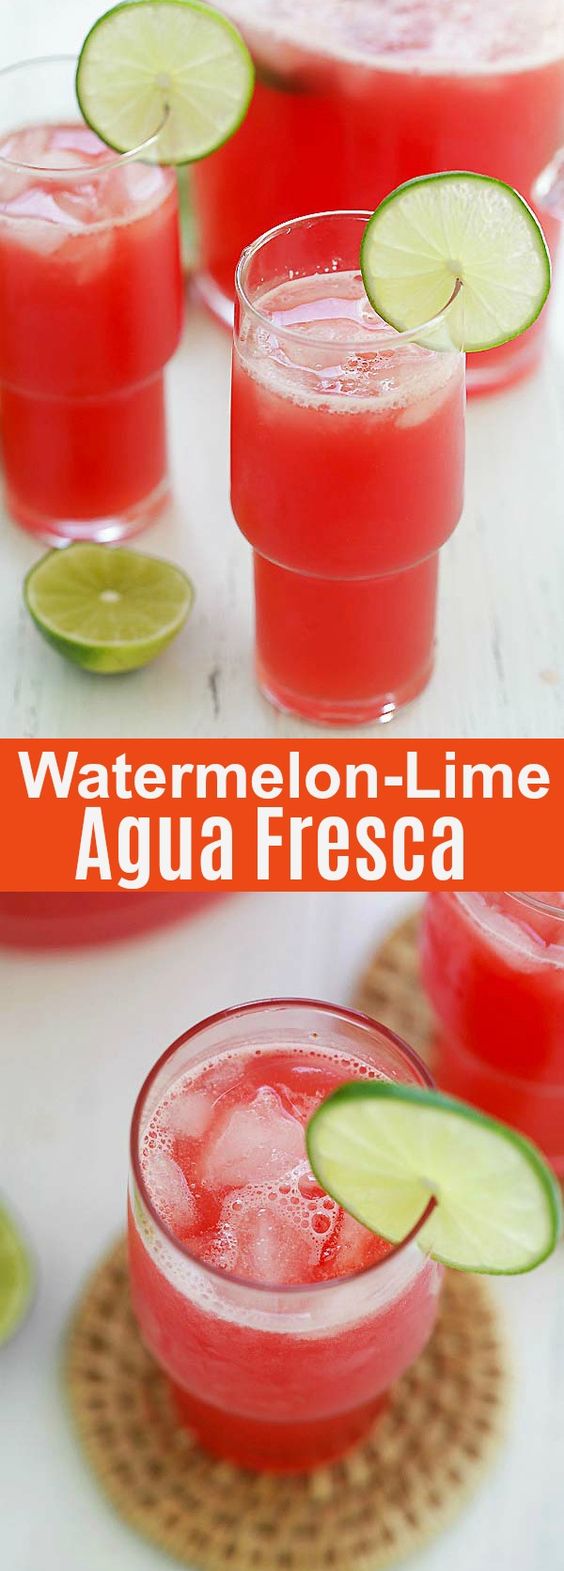 Watermelon-Lime Agua Fresca - refreshing summertime drink that you can enjoy the entire season. Made with watermelon, lime and syrup! This beverage is all you need to beat the heat | rasamalaysia.com